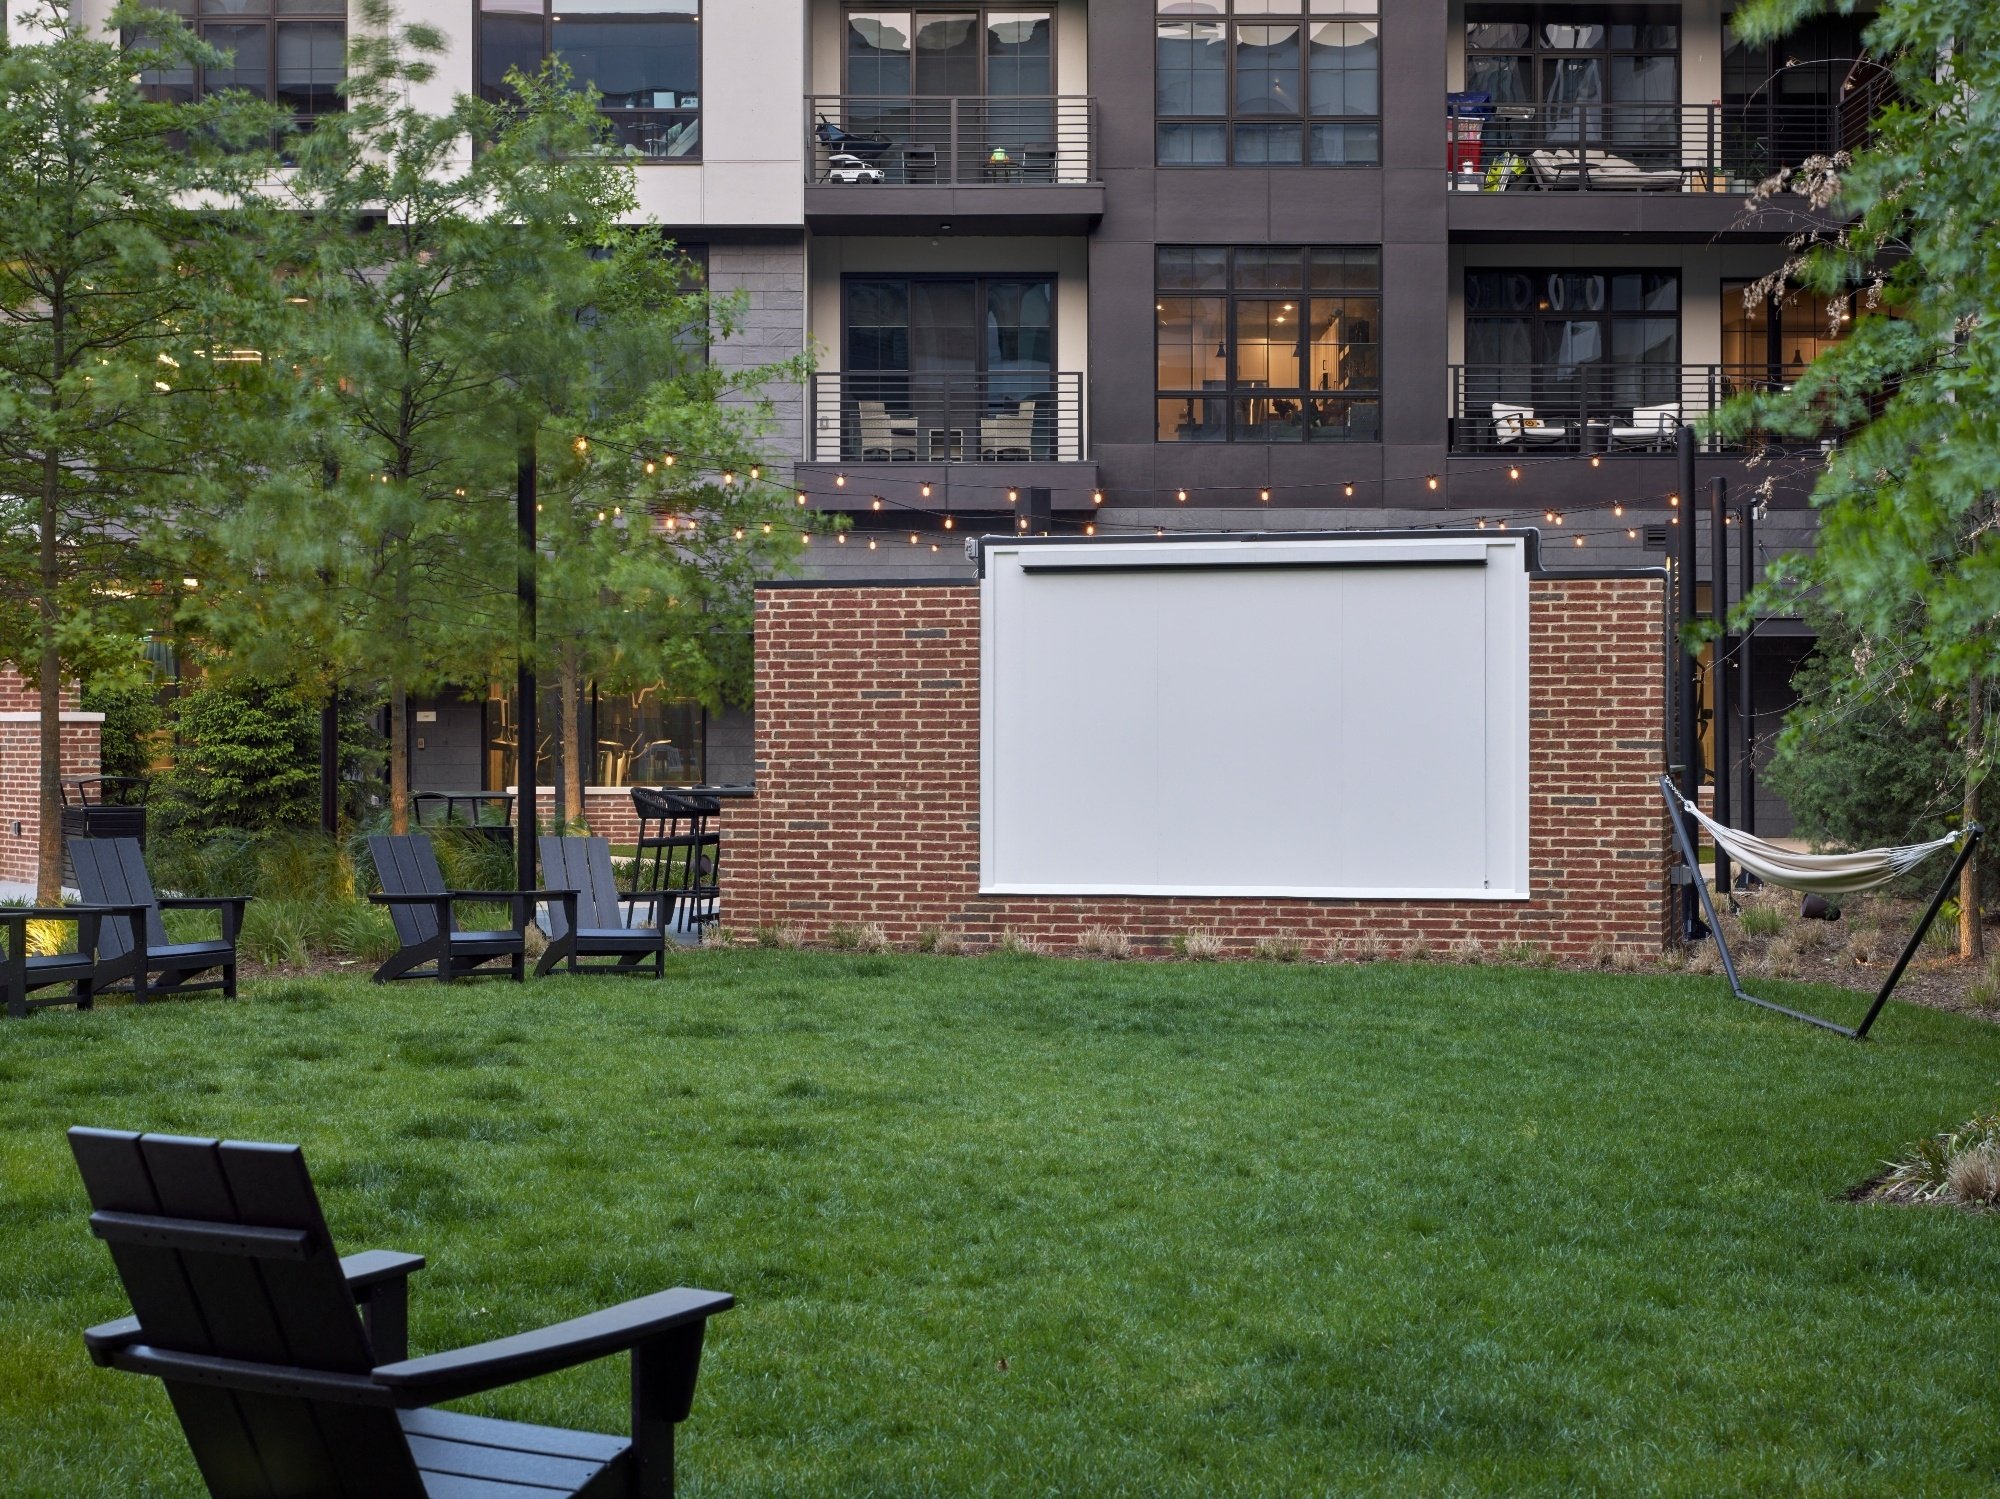 outdoor seating, outdoor tv, movie screen, grass, turf, landscaping, courtyard, outdoor lounge, chairs, lounge chairs